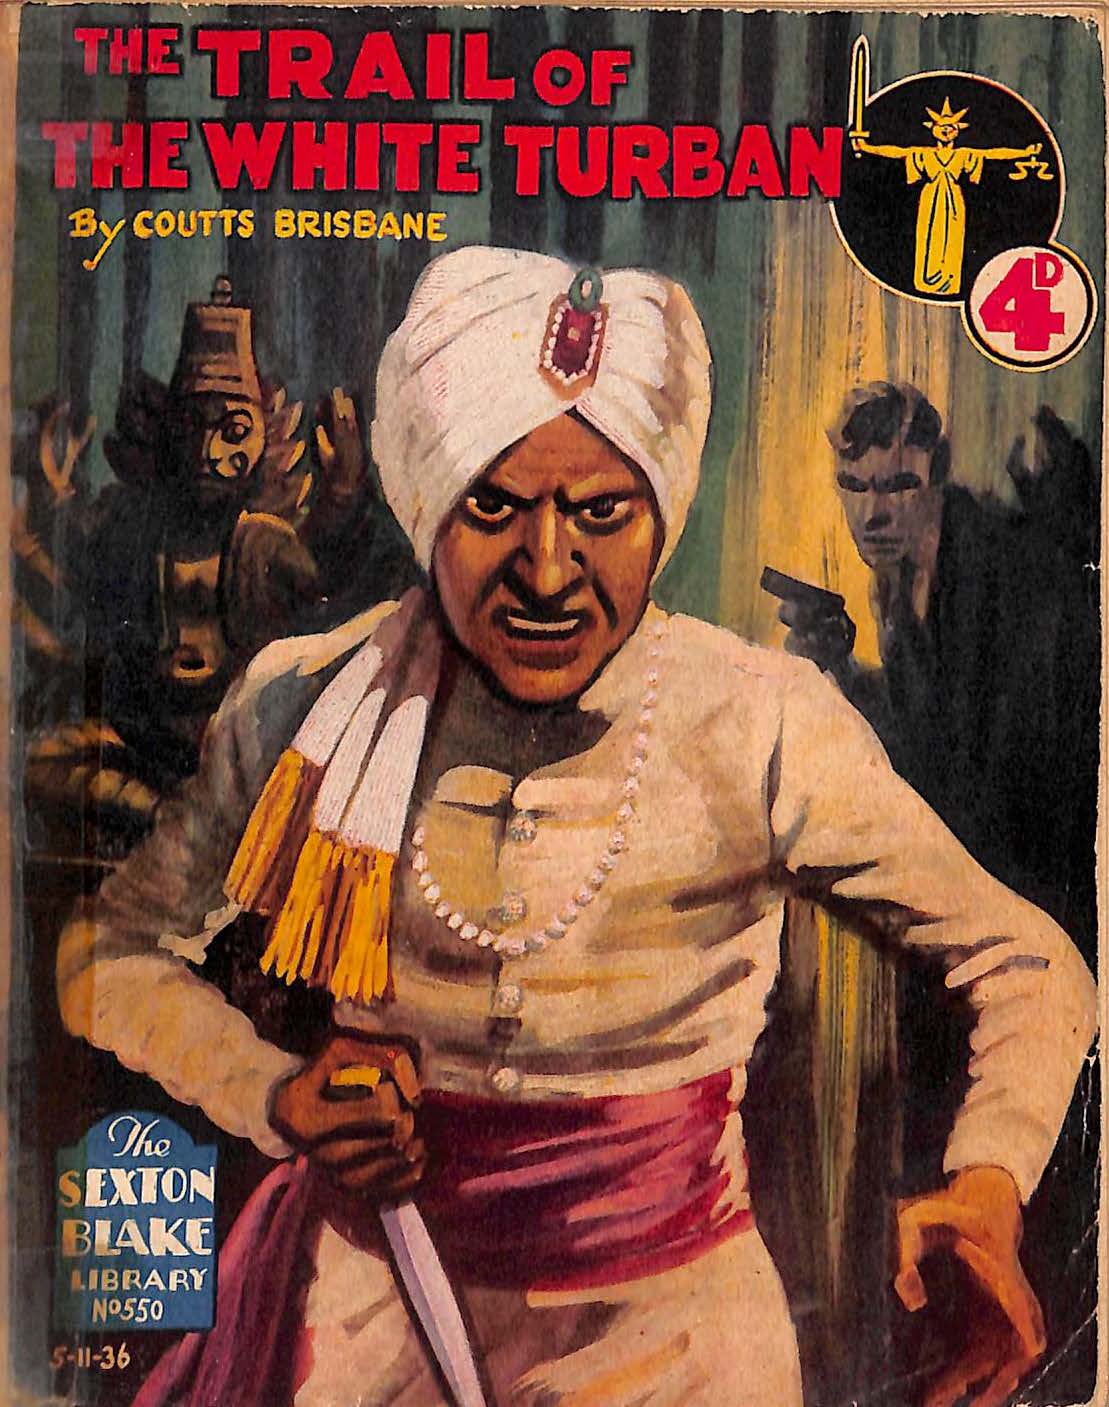 Book Cover For Sexton Blake Library S2 550 - The Trail of the White Turban